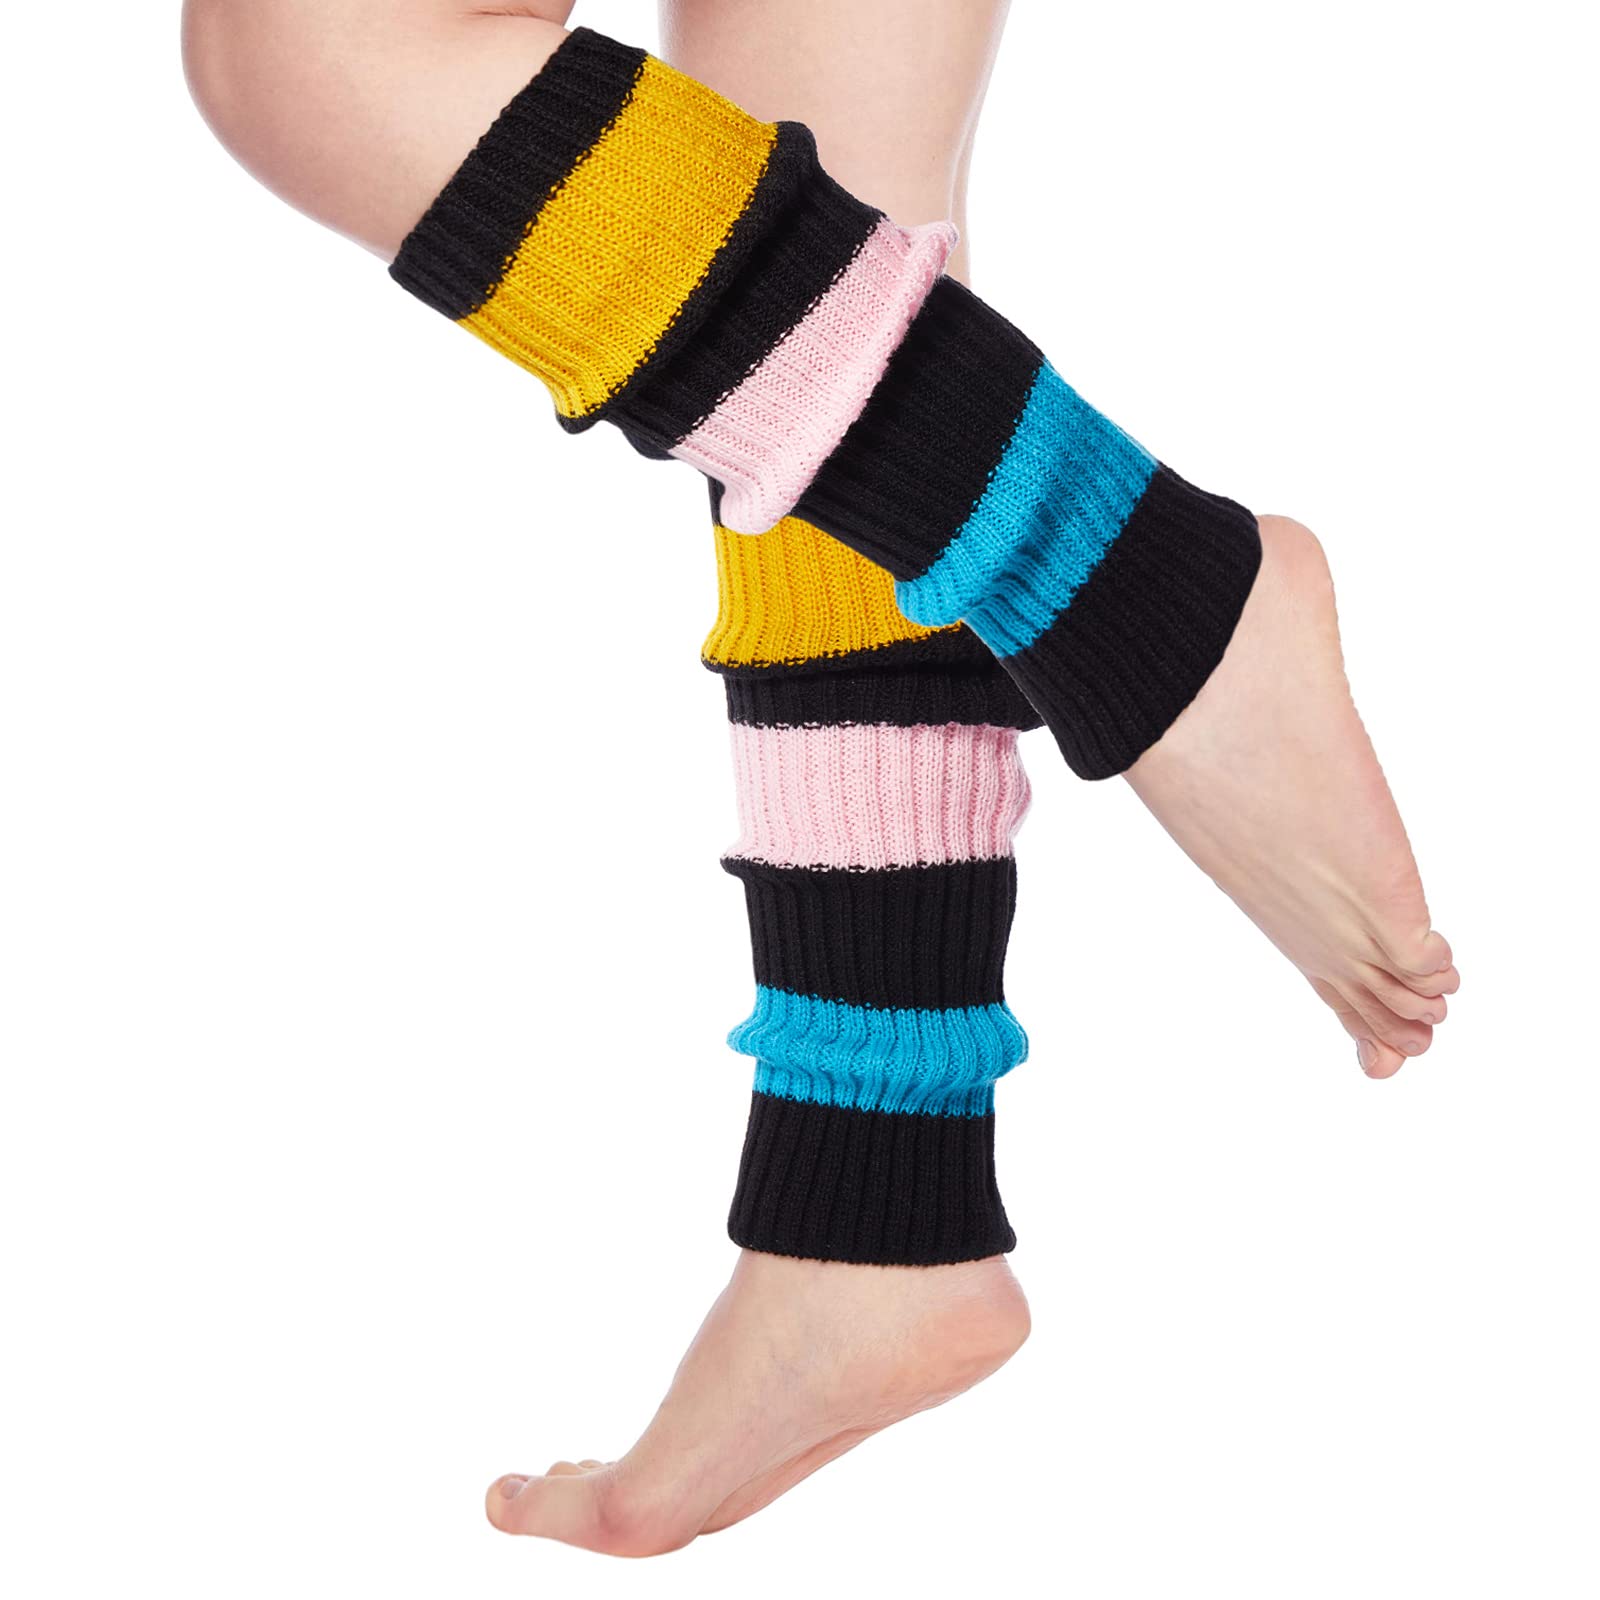 Womens Leg Warmers Neon Knitted for 80s Party Sports Yoga-Black & Blue & Pink & Yellow - Moon Wood